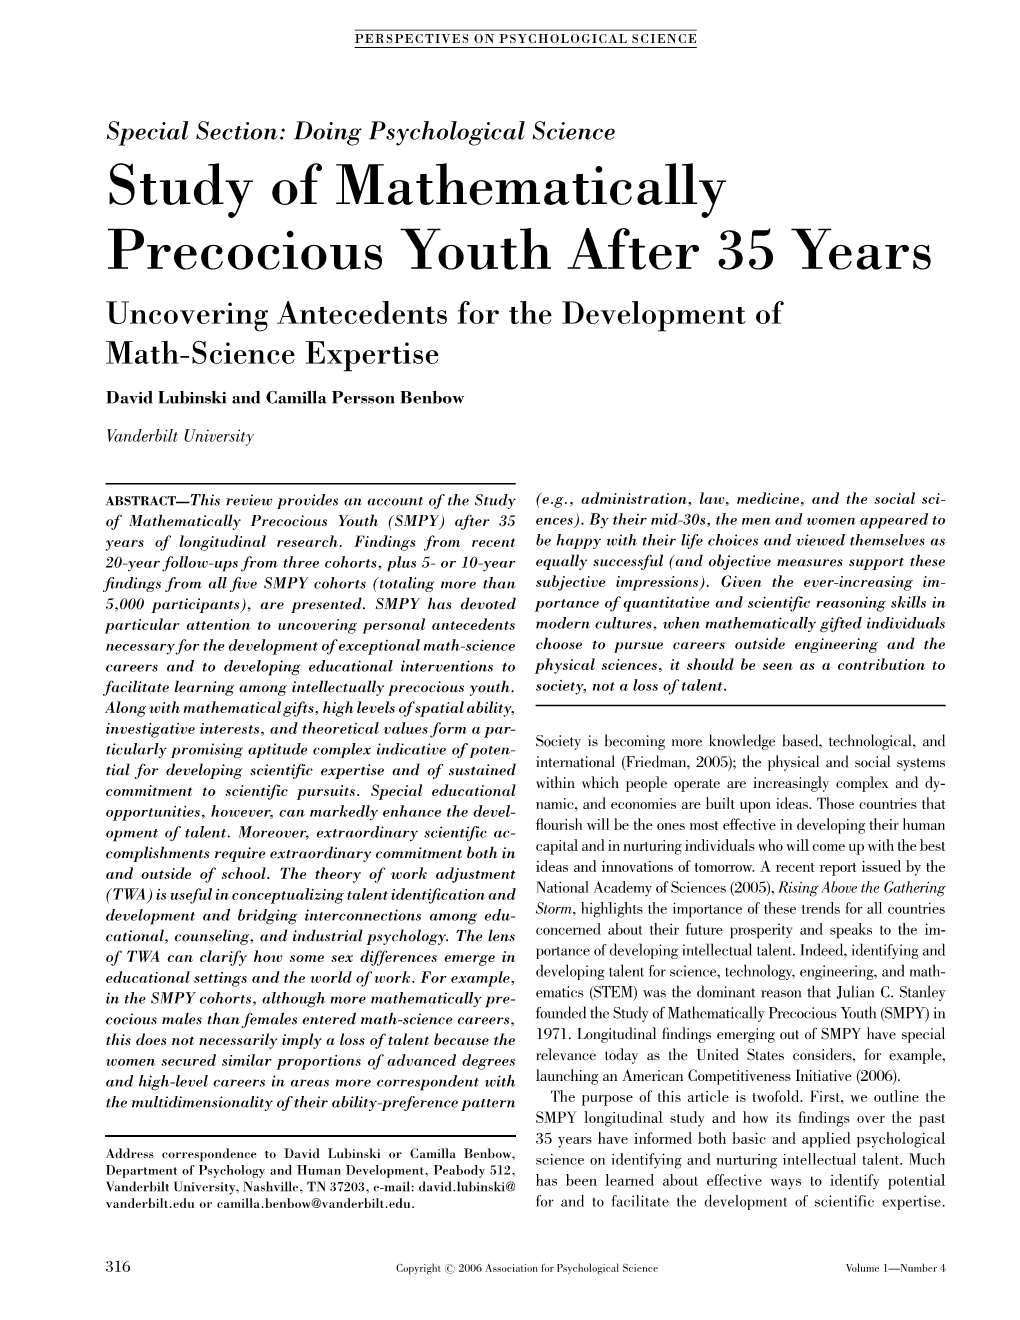 Study of Mathematically Precocious Youth After 35 Years Uncovering Antecedents for the Development of Math-Science Expertise David Lubinski and Camilla Persson Benbow